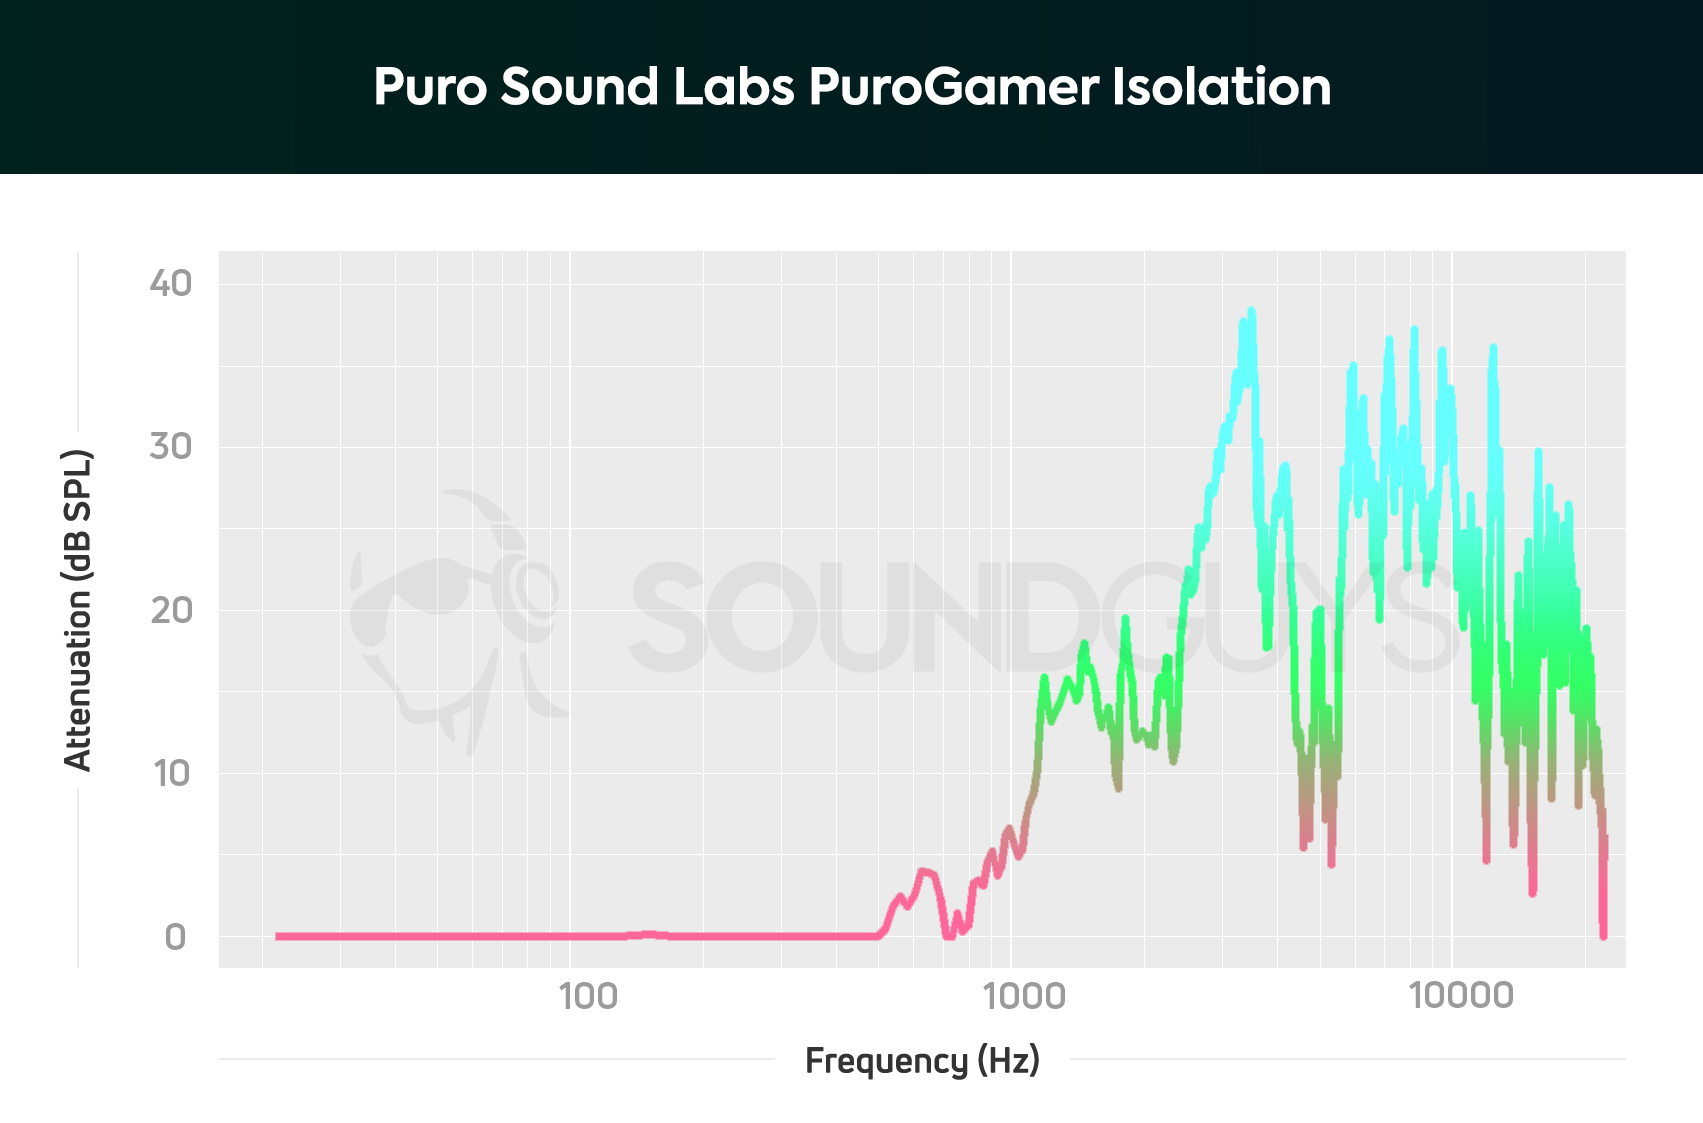 An isolation chart for The Puro Sound Labs PuroGamer